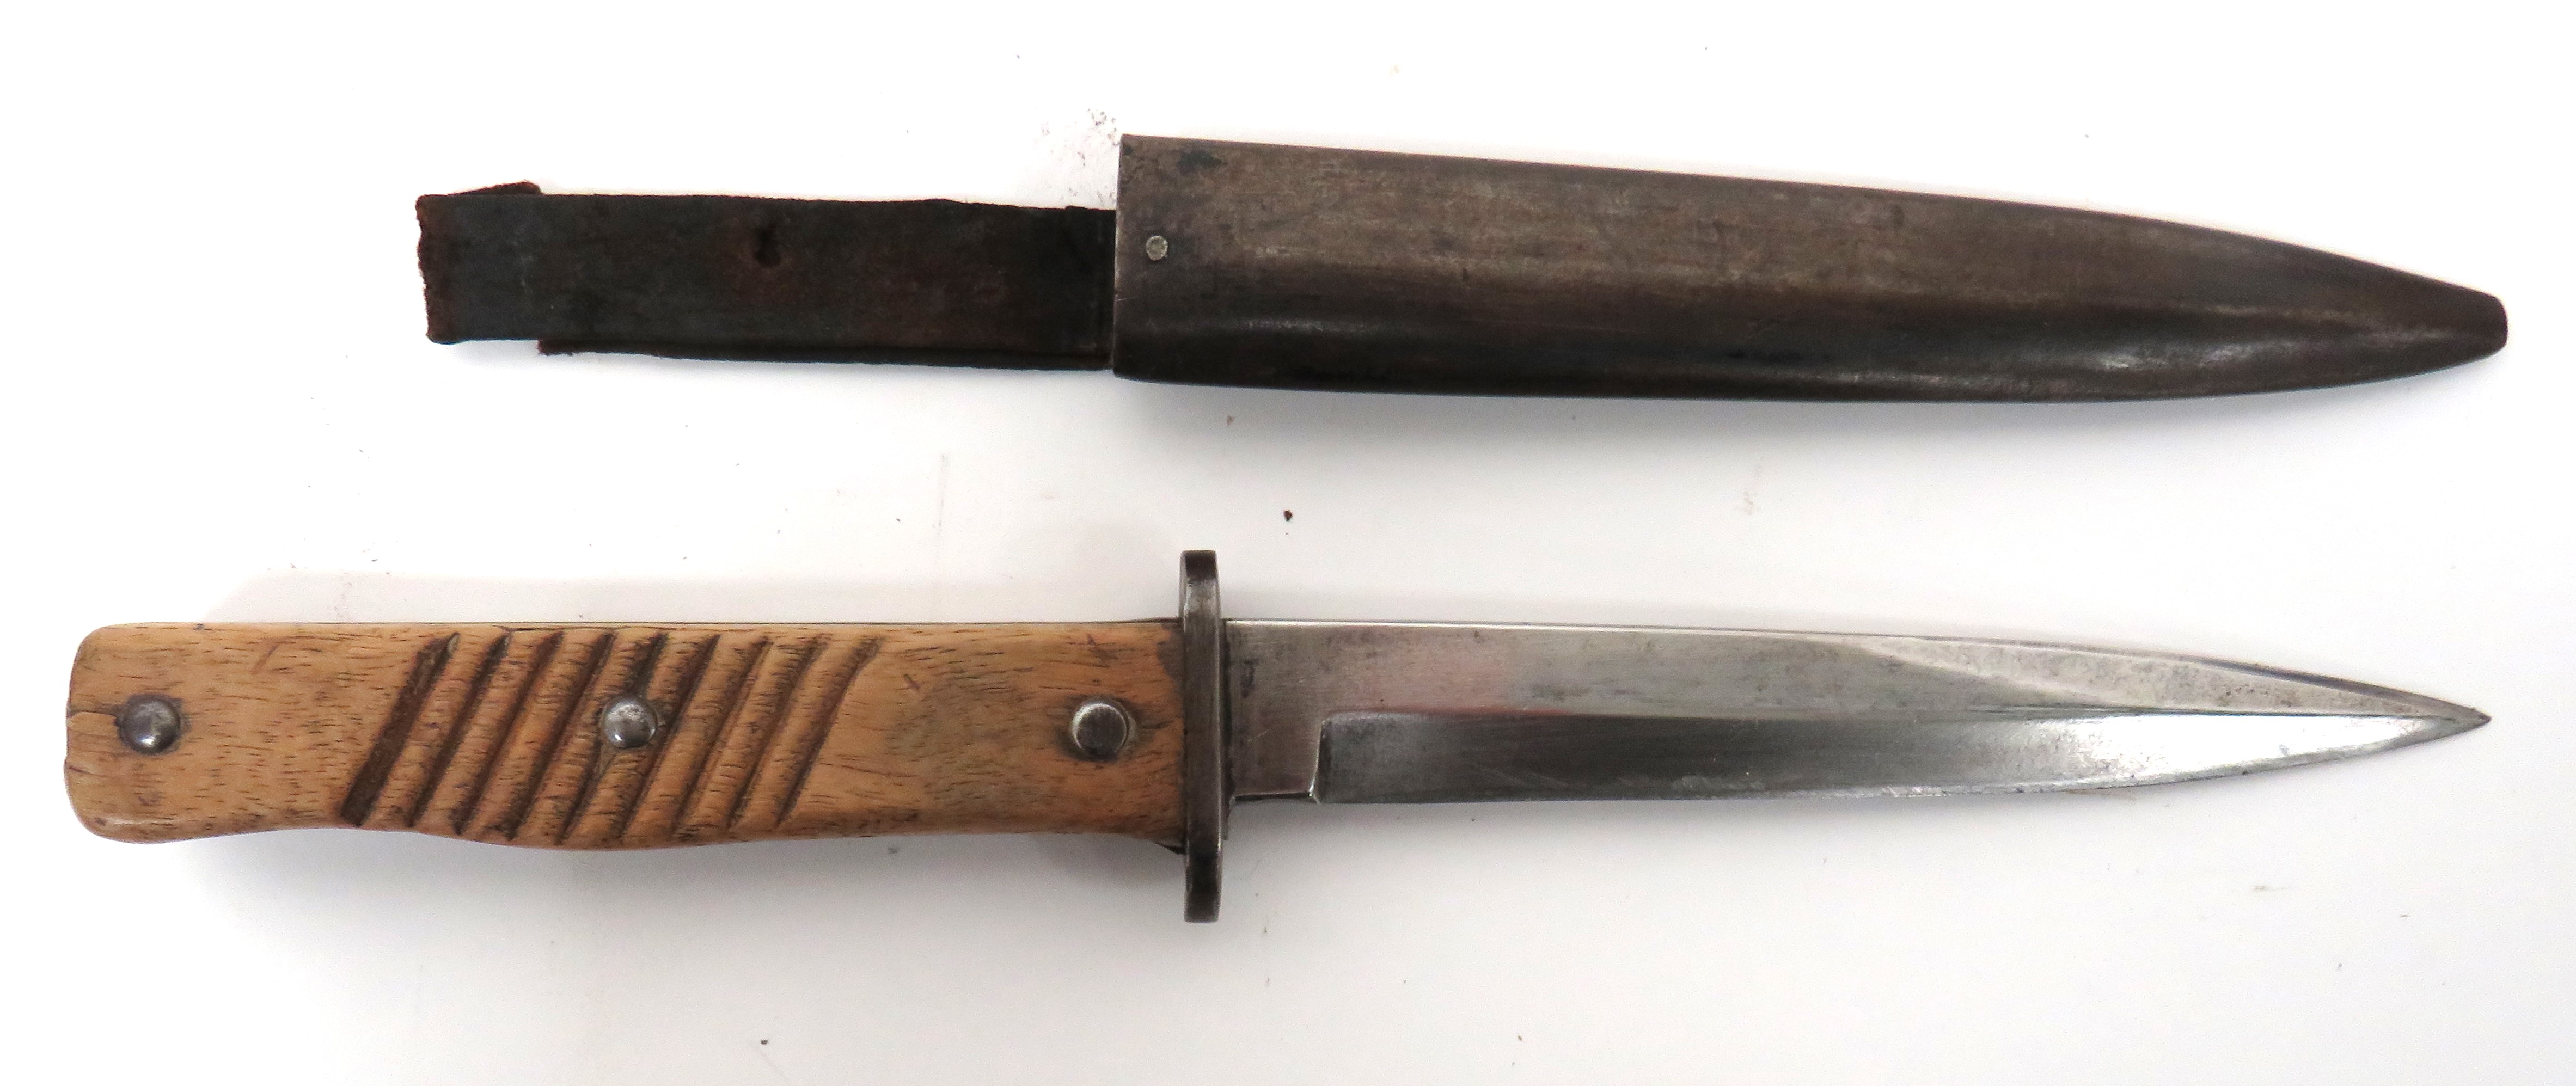 WW1 Imperial German Combat Trench Knife 6 inch, single edged blade with sharpened back edge point.